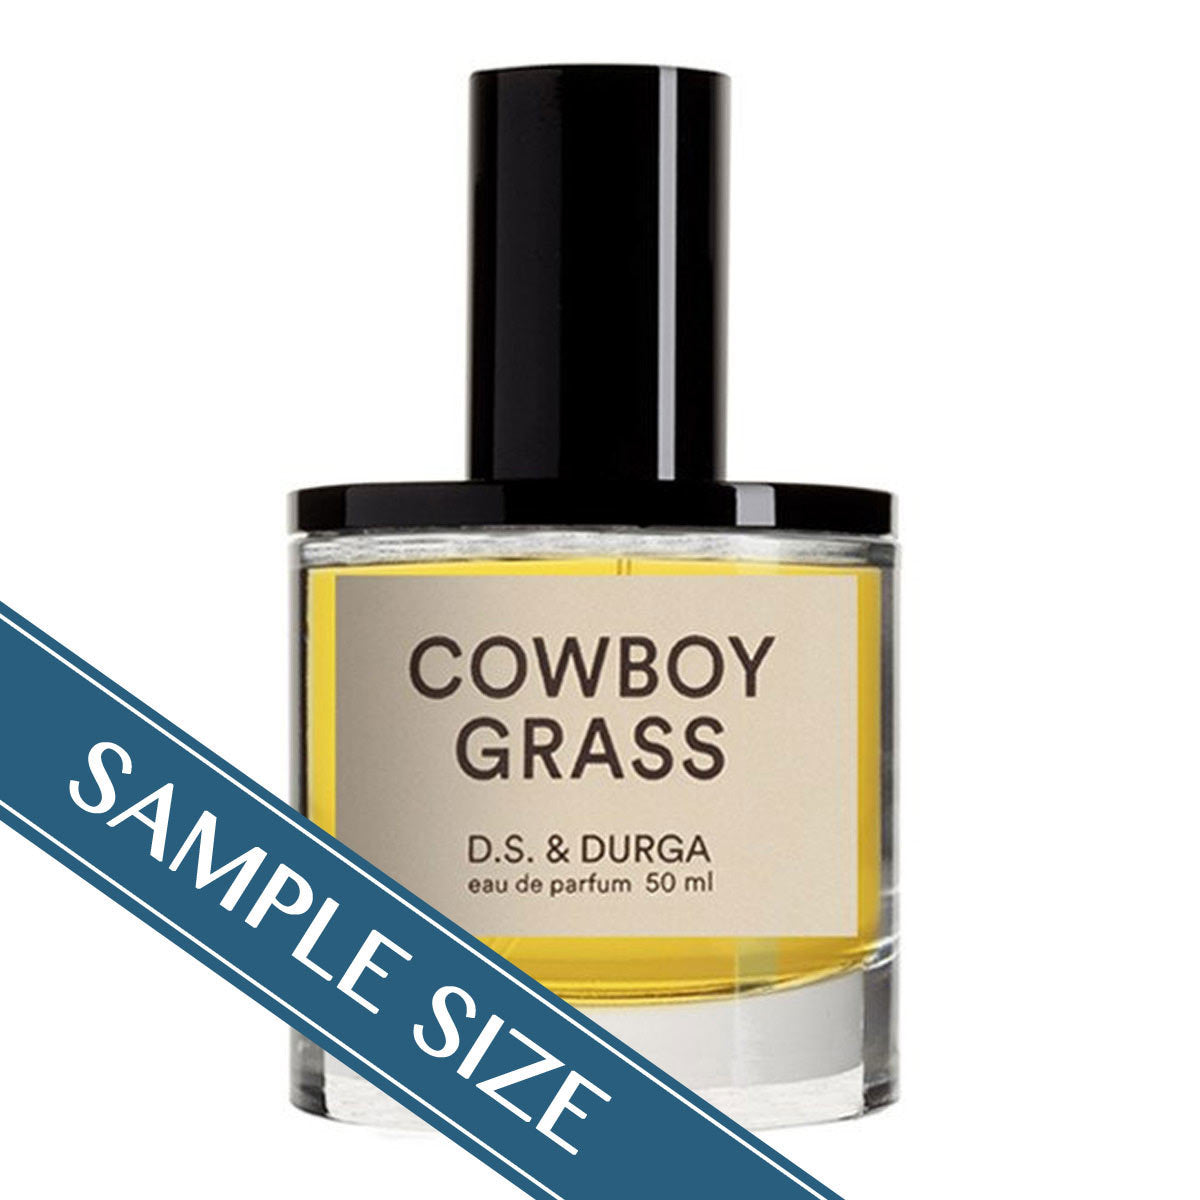 Primary image of Sample - Cowboy Grass EDP